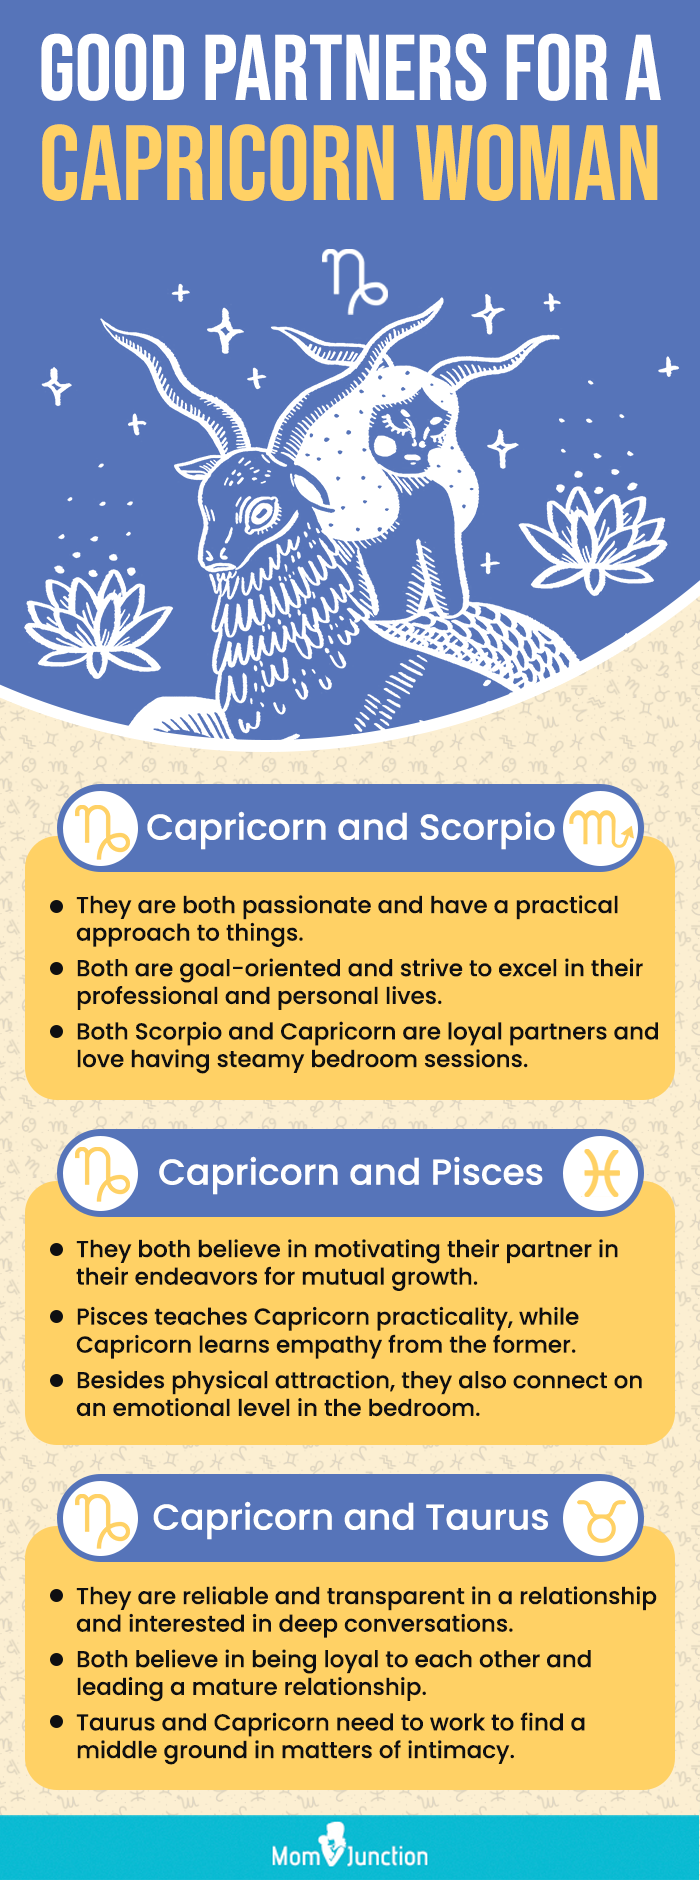 good partners for a capricon woman [infographic]